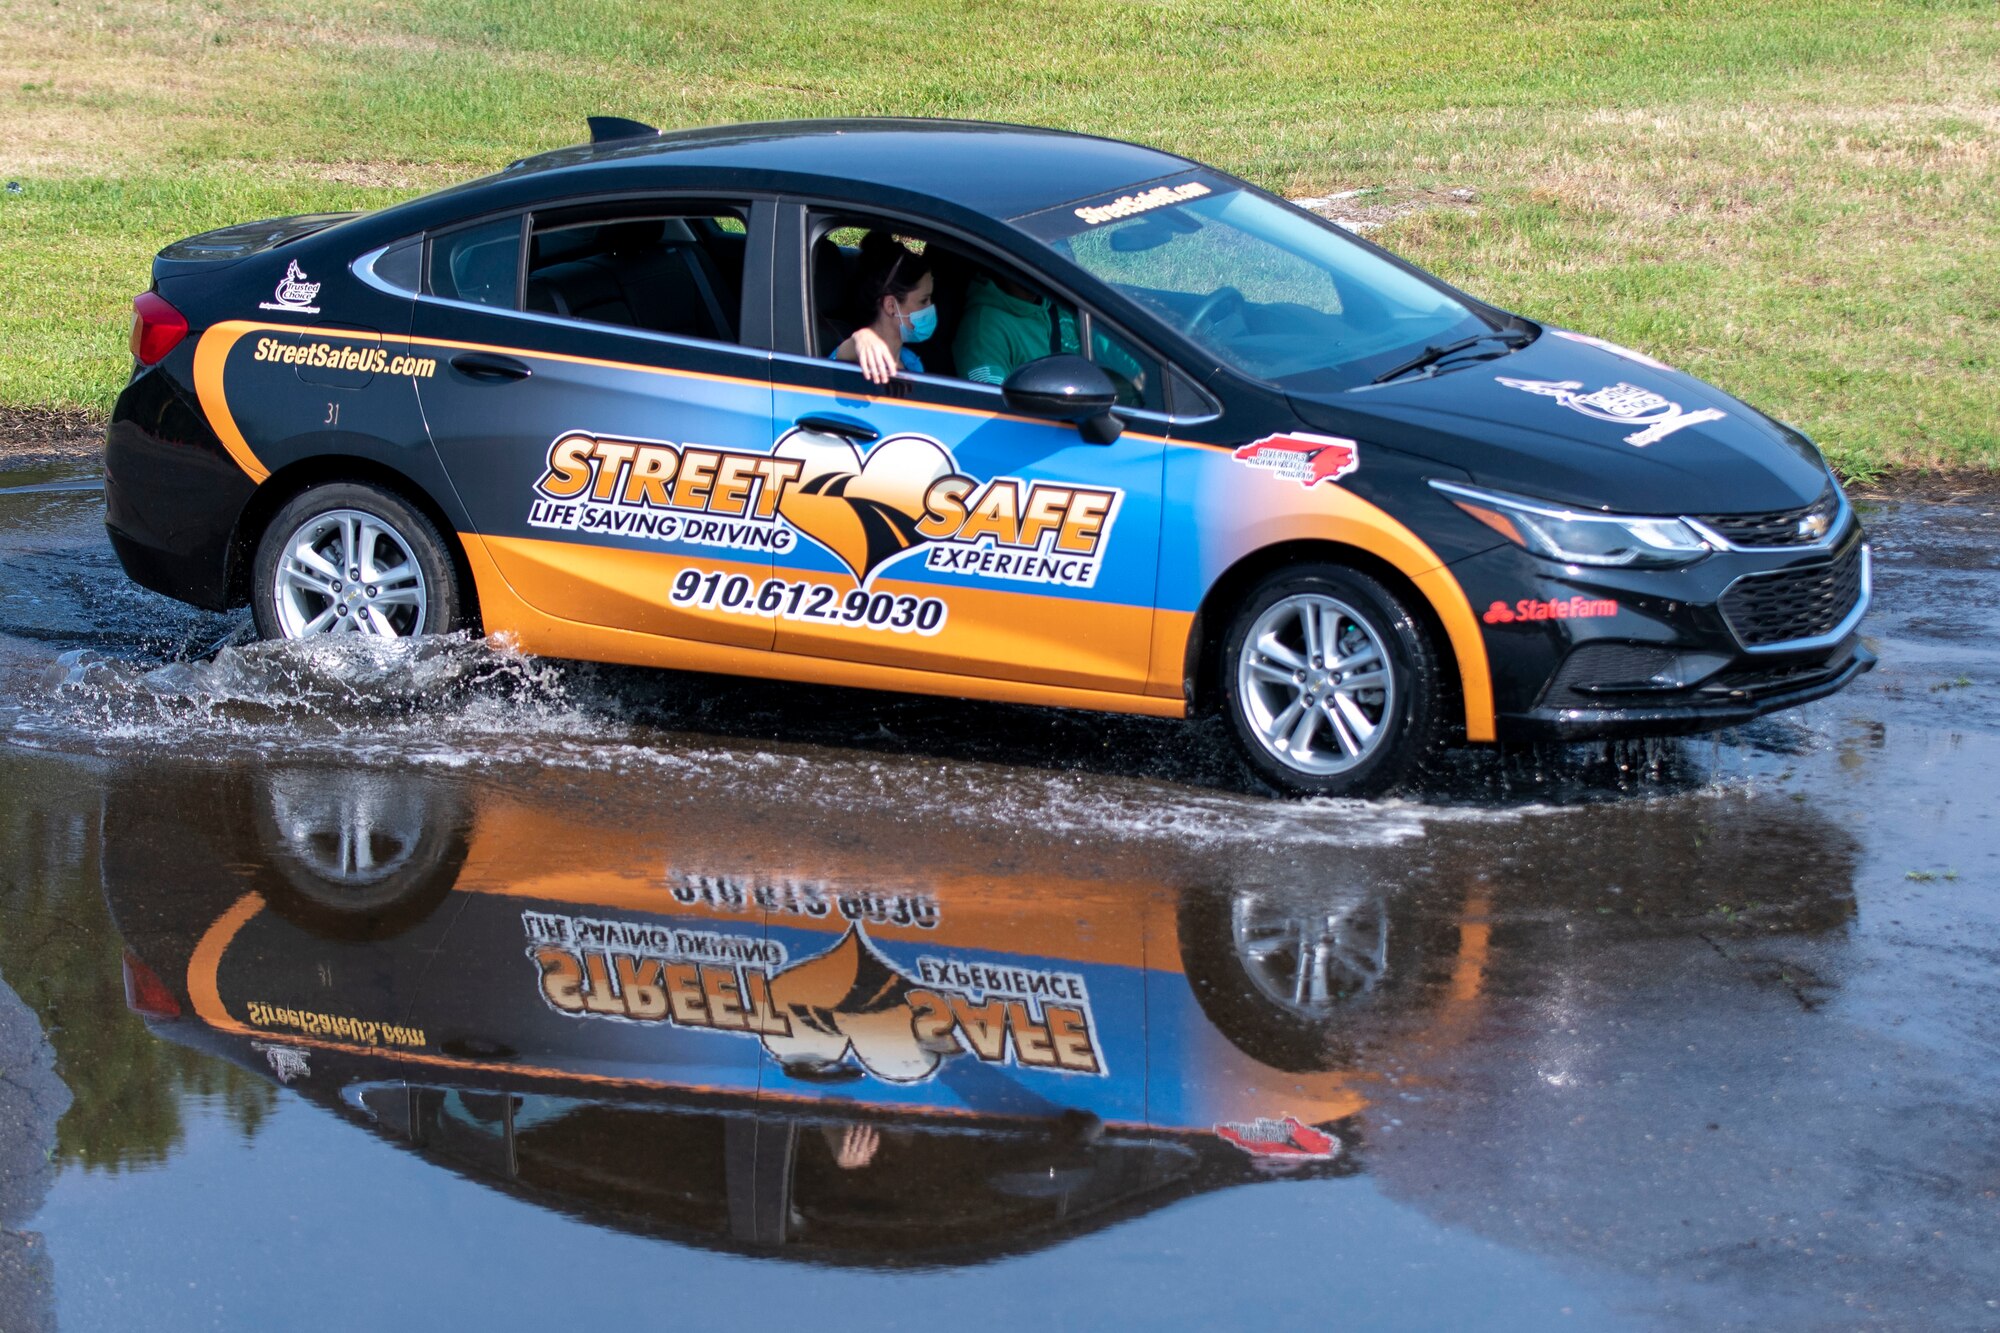 An Airman from Team Seymour drives through water during safe driving training at Seymour Johnson Air Force Base, North Carolina, May 26, 2021.